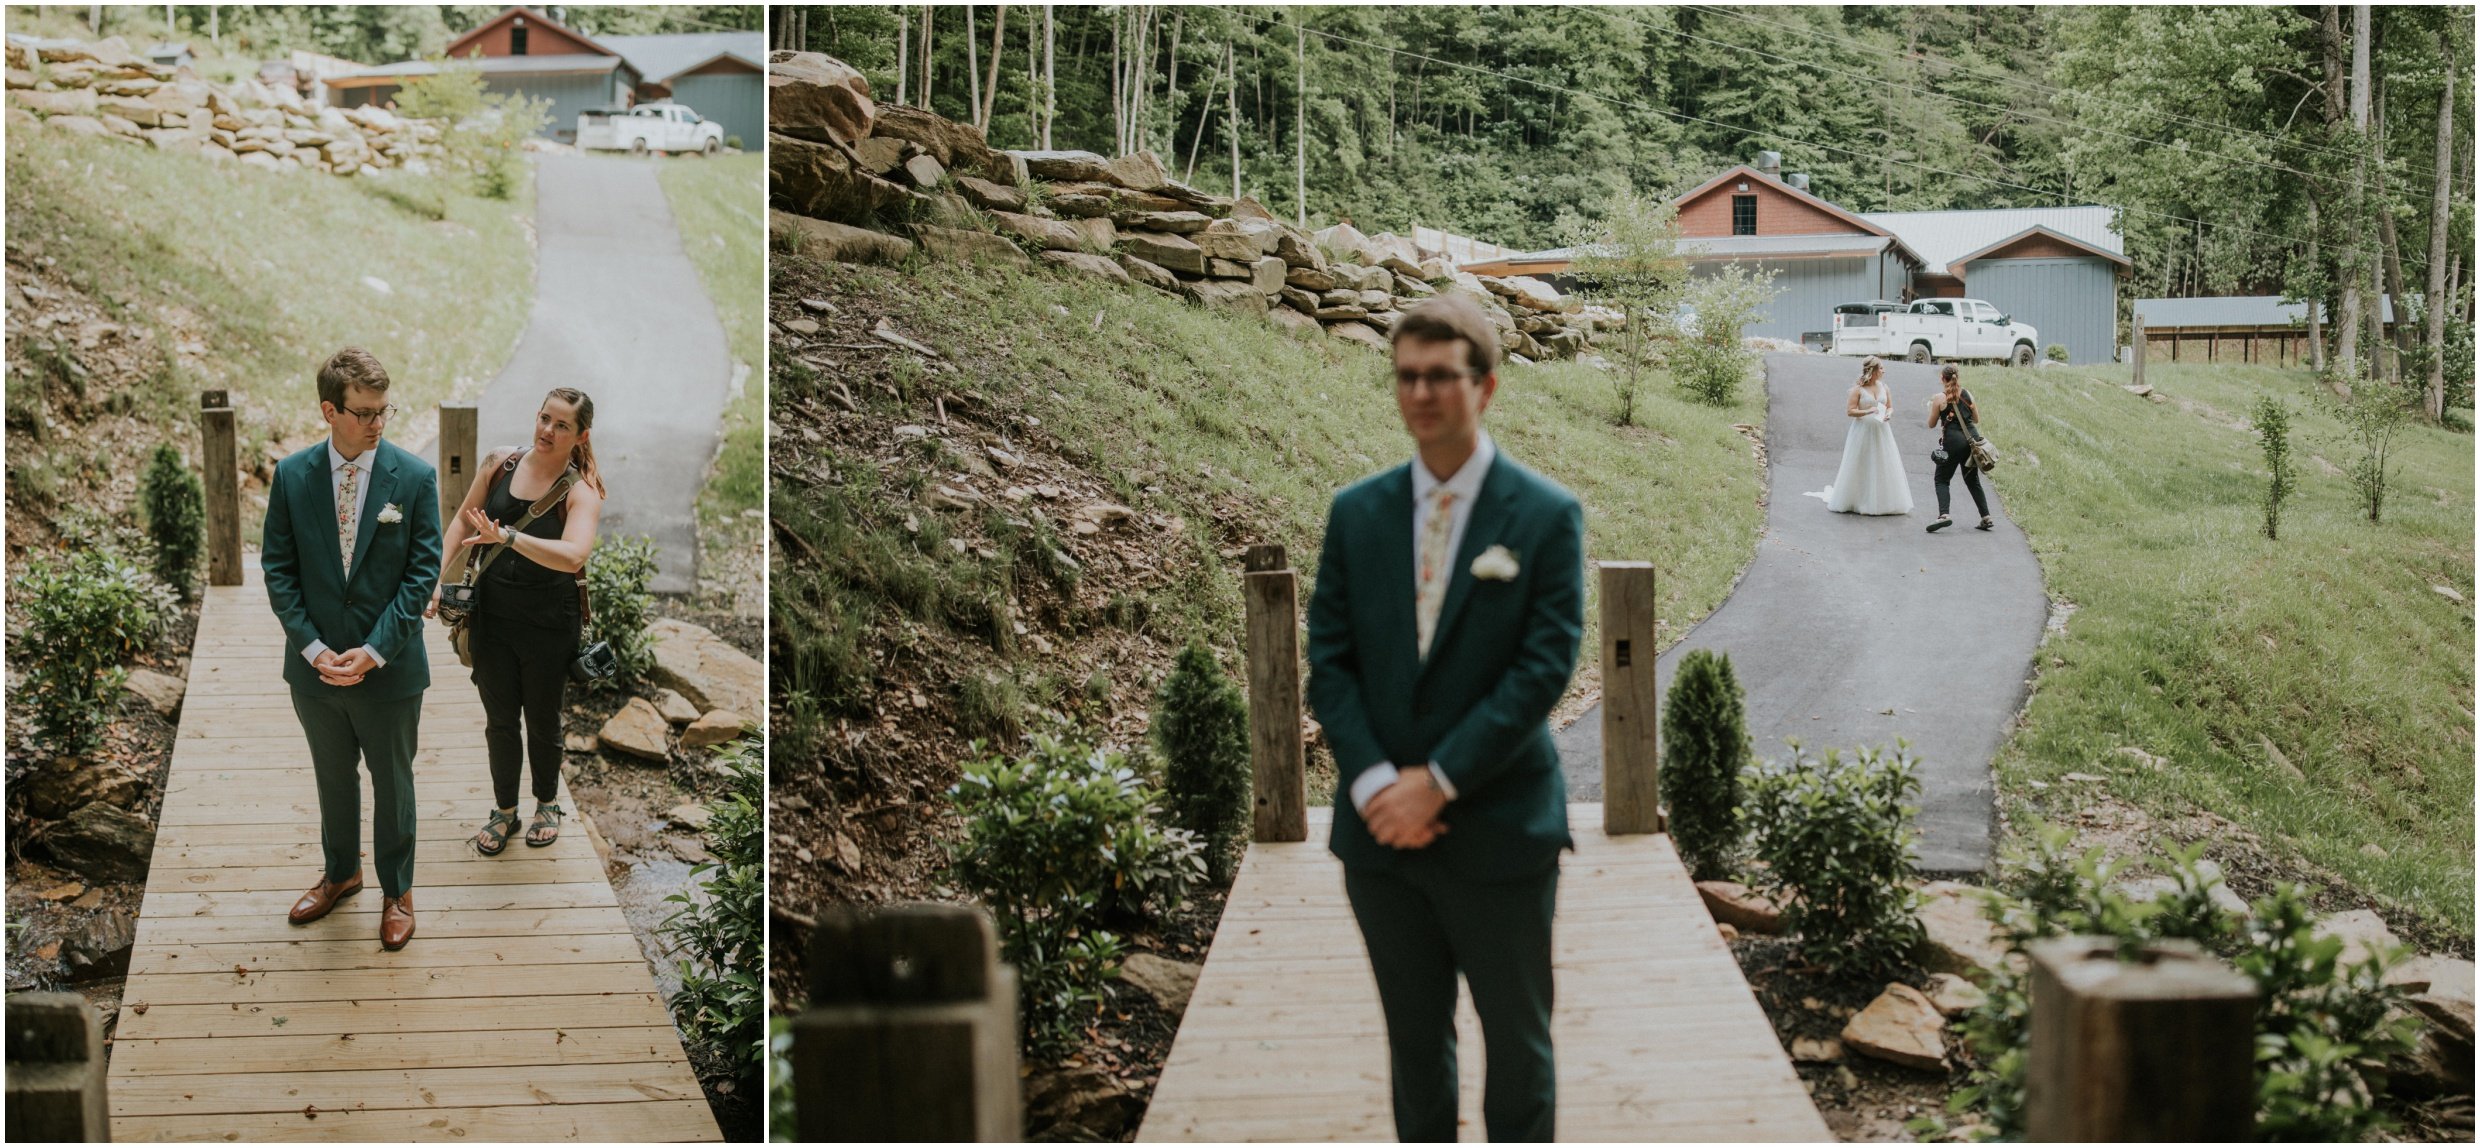 How we set up a first look- position and coach the groom, then get the bride!